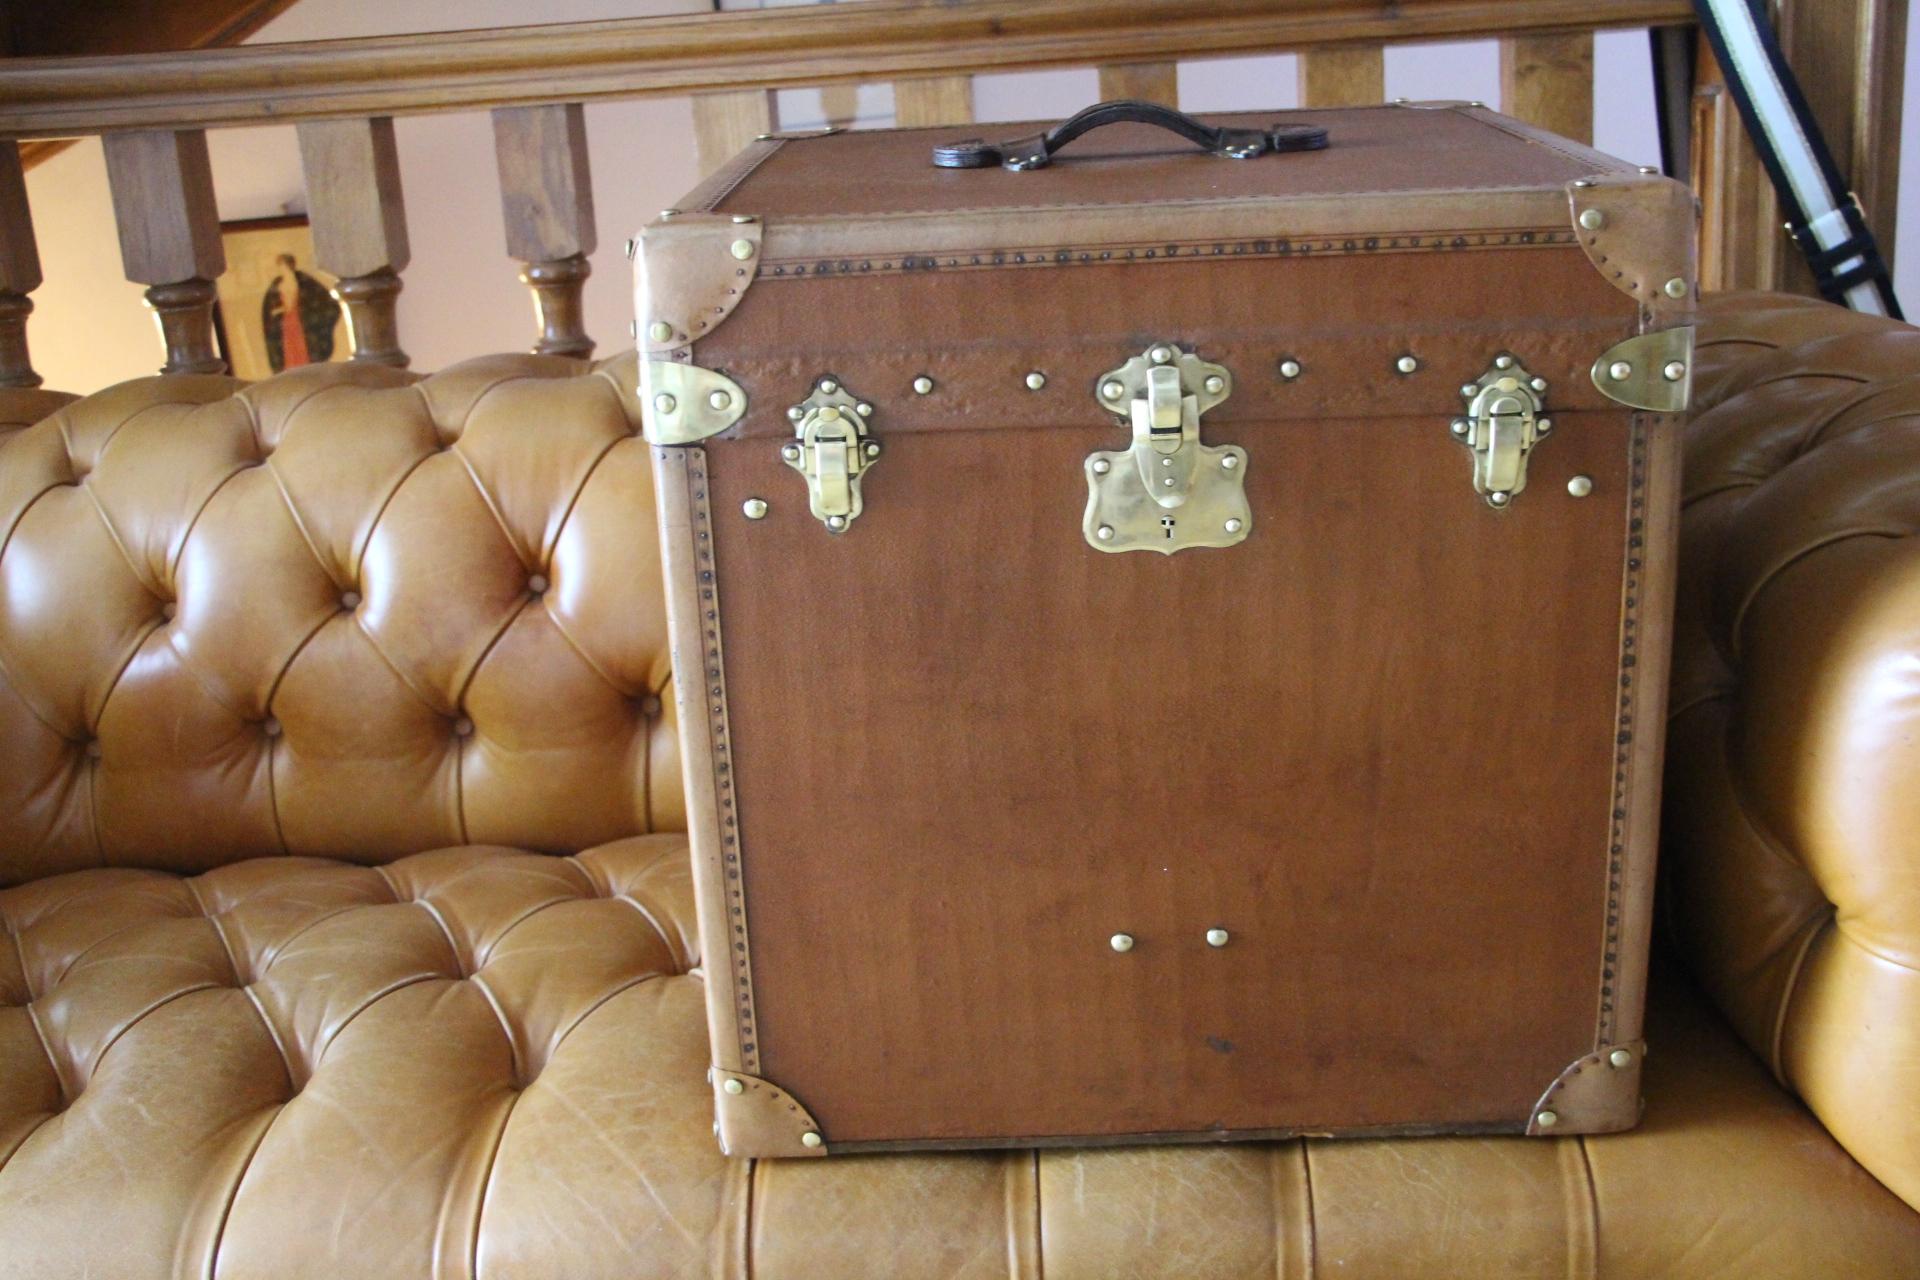 This very nice brown canvas and leather hat box features lozine trim and leather top handle as well as solid brass locks and studs.
Its brown canvas is very elegant and it has got a very rich and warm patina.
Its interior has been relined a while